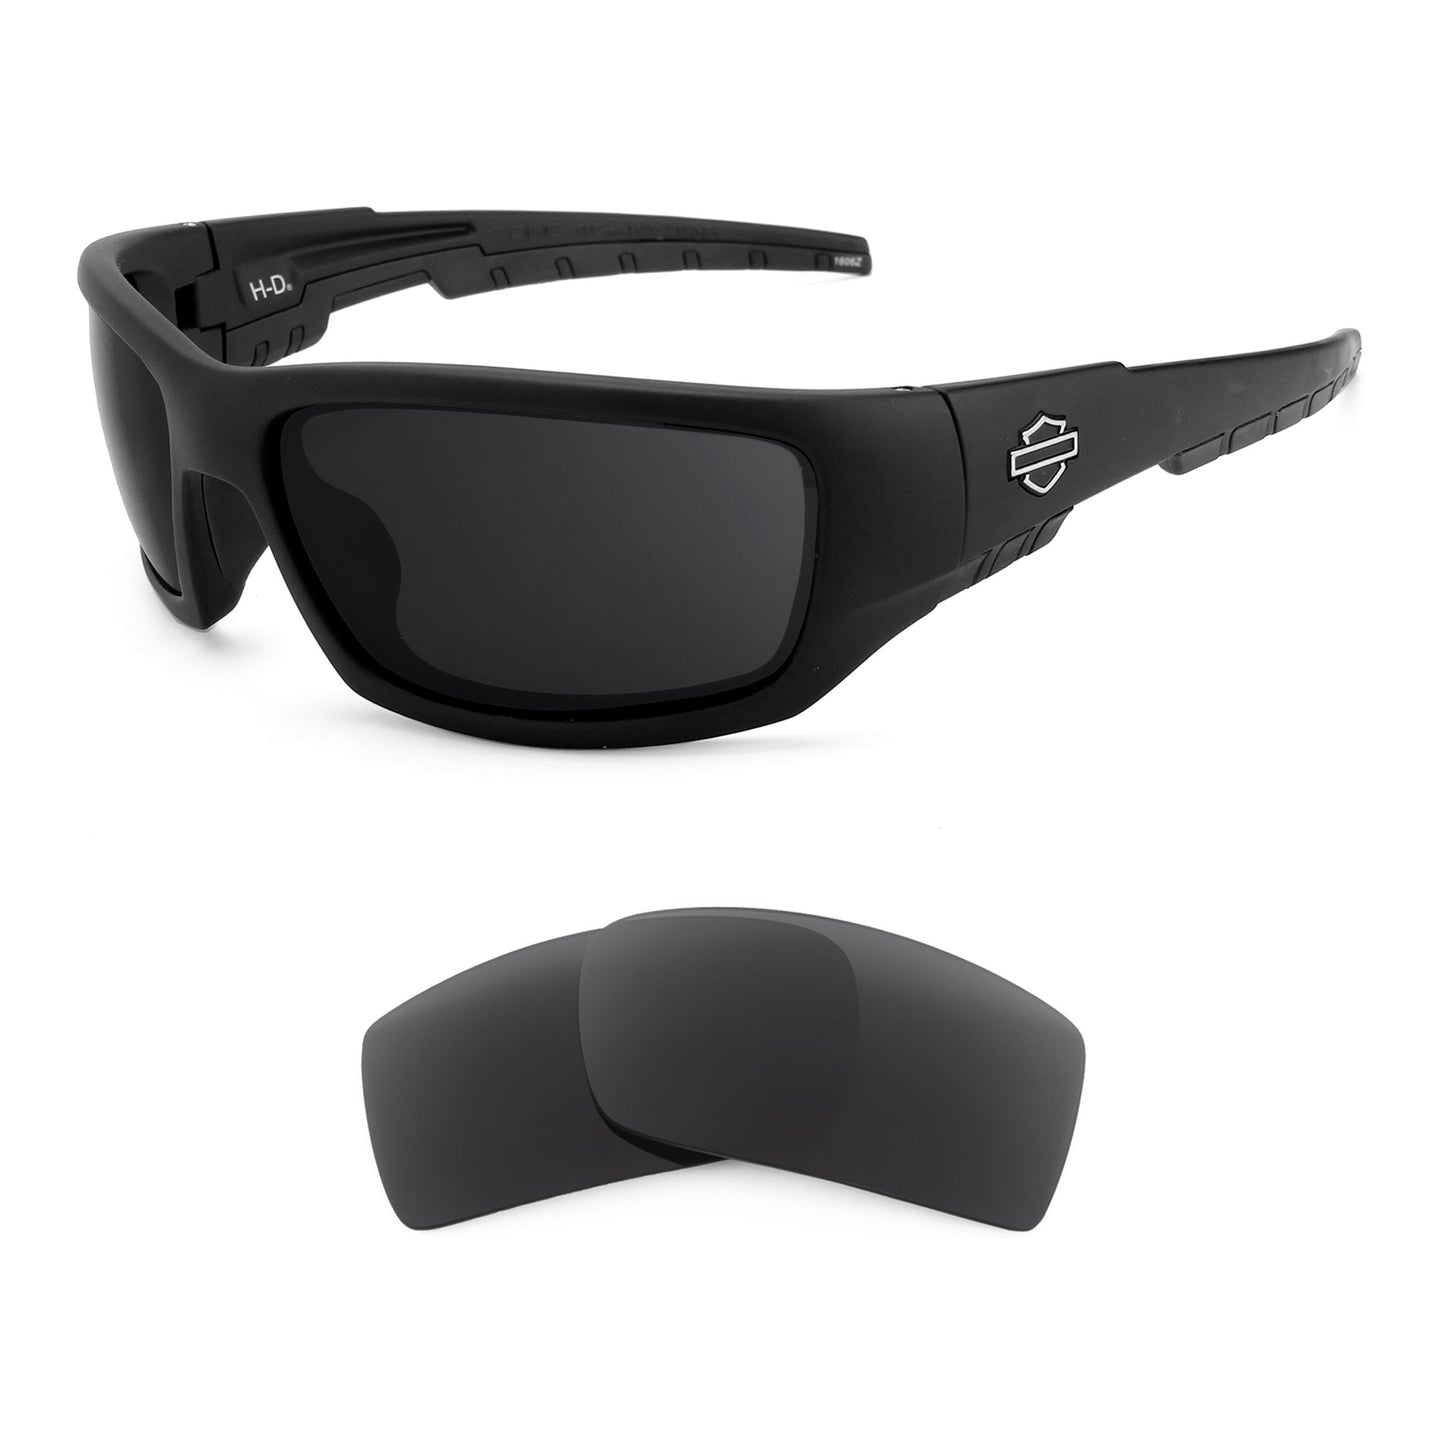 Harley Davidson Zone sunglasses with replacement lenses